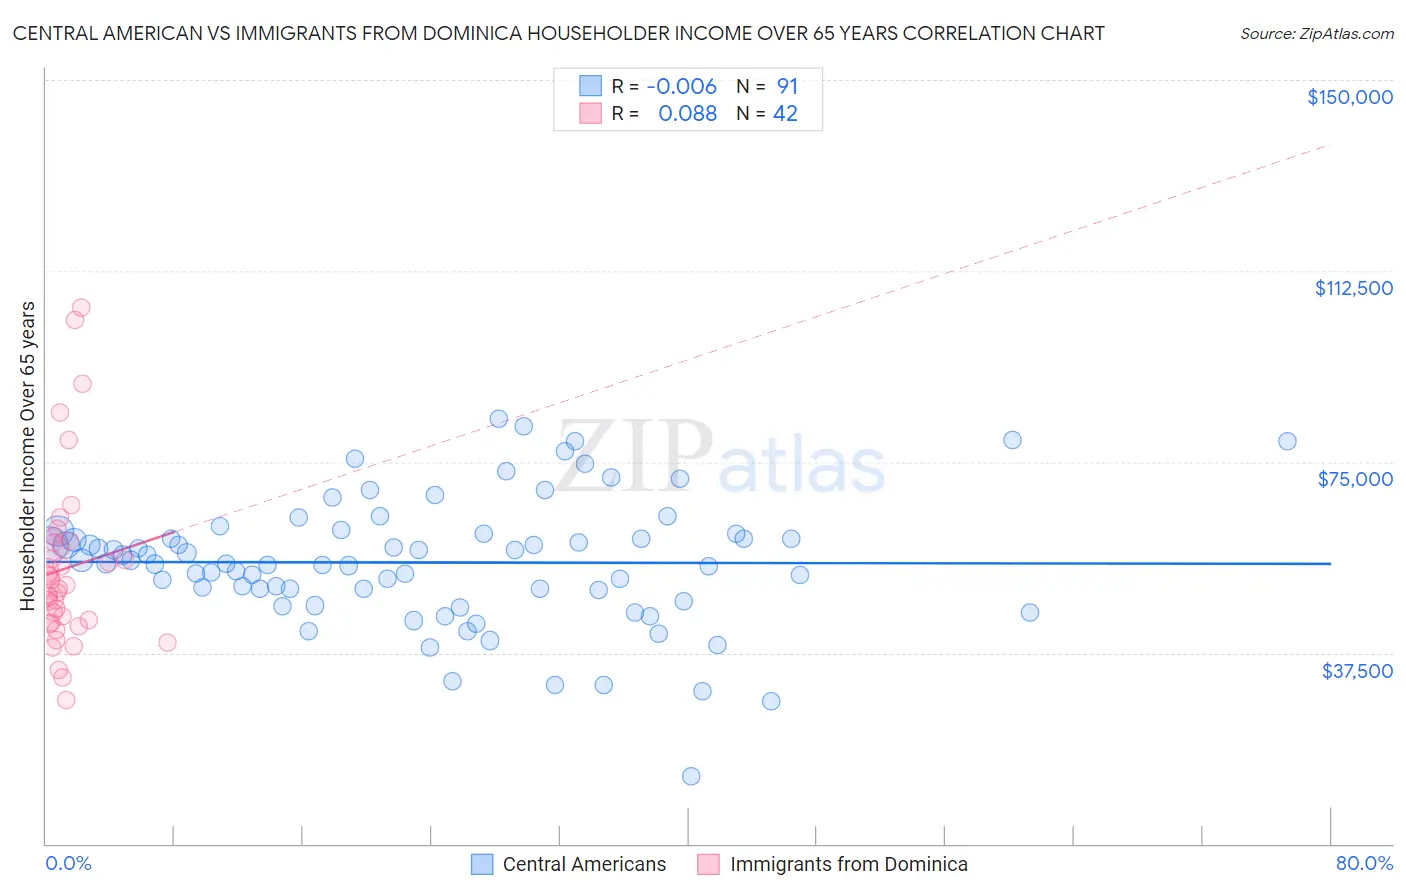 Central American vs Immigrants from Dominica Householder Income Over 65 years